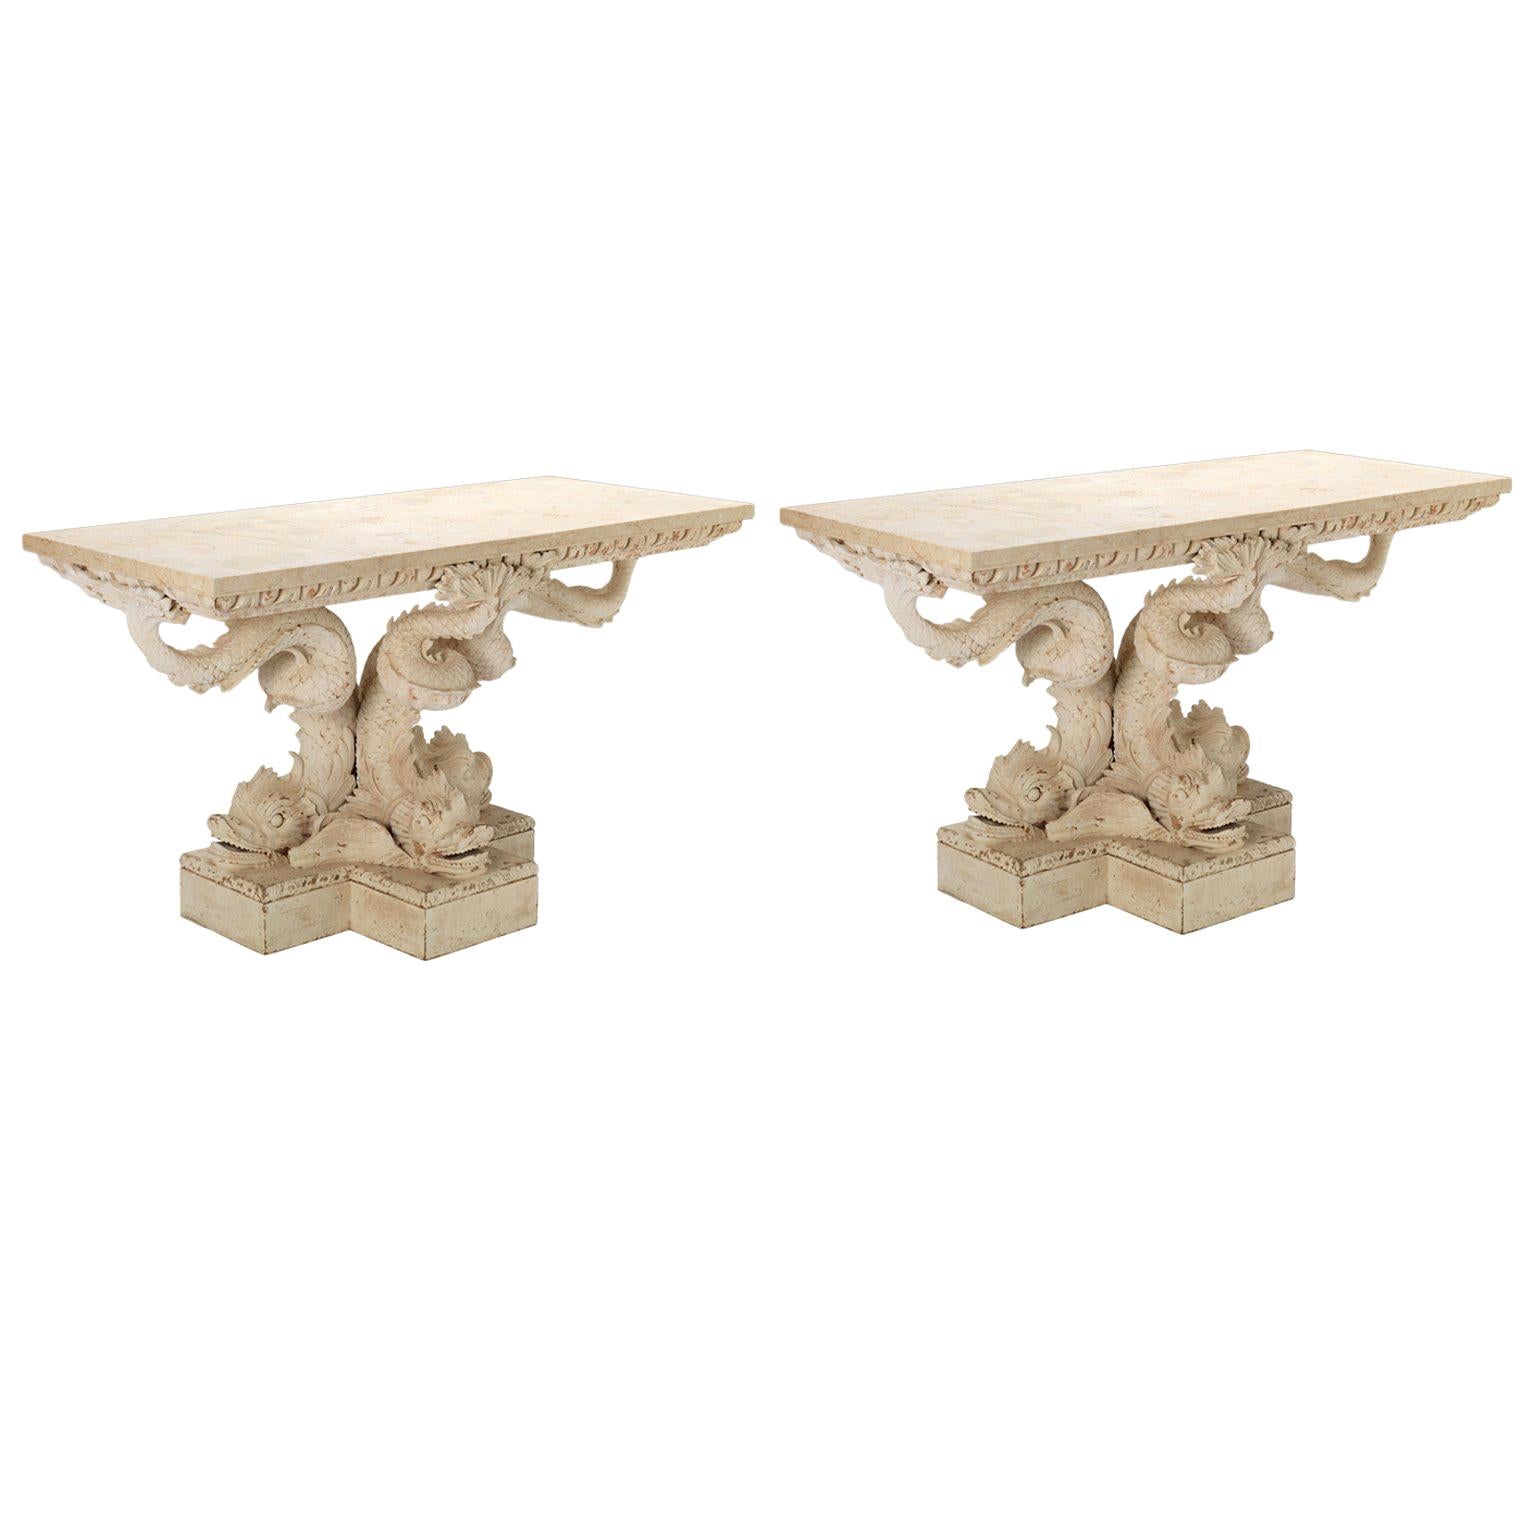 Pair of Dolphin Pedestal Tables in the Manner of William Kent